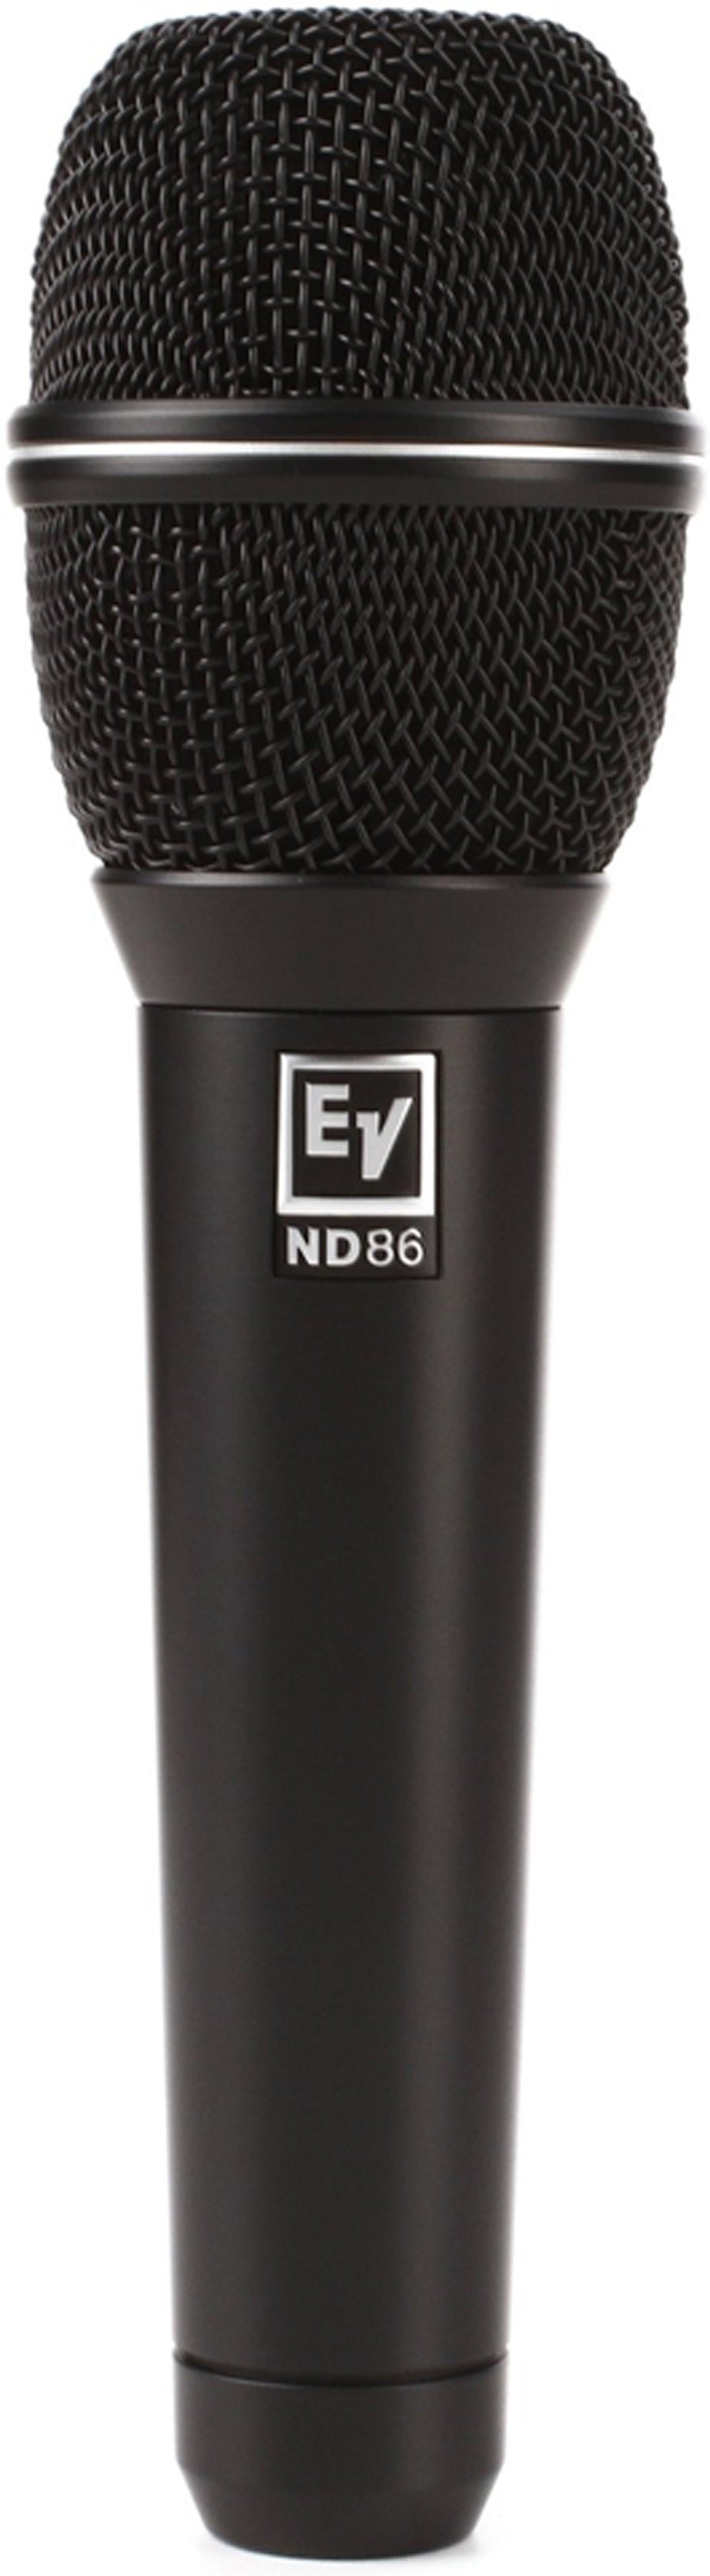 Electro-Voice ND86 Dynamic Supercardioid Microphone